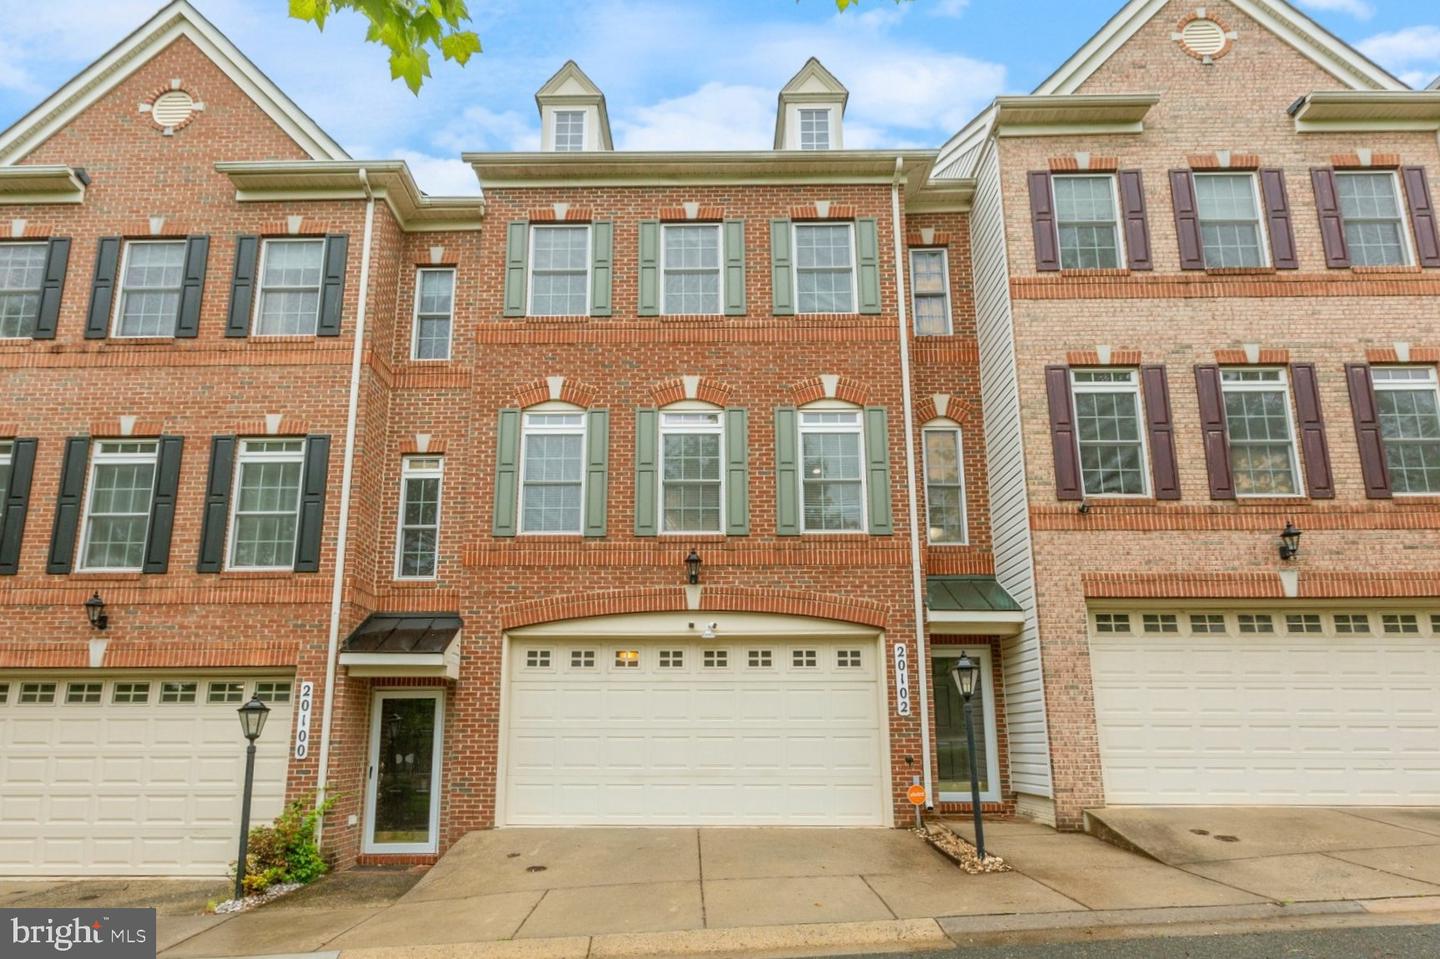 View Germantown, MD 20876 townhome